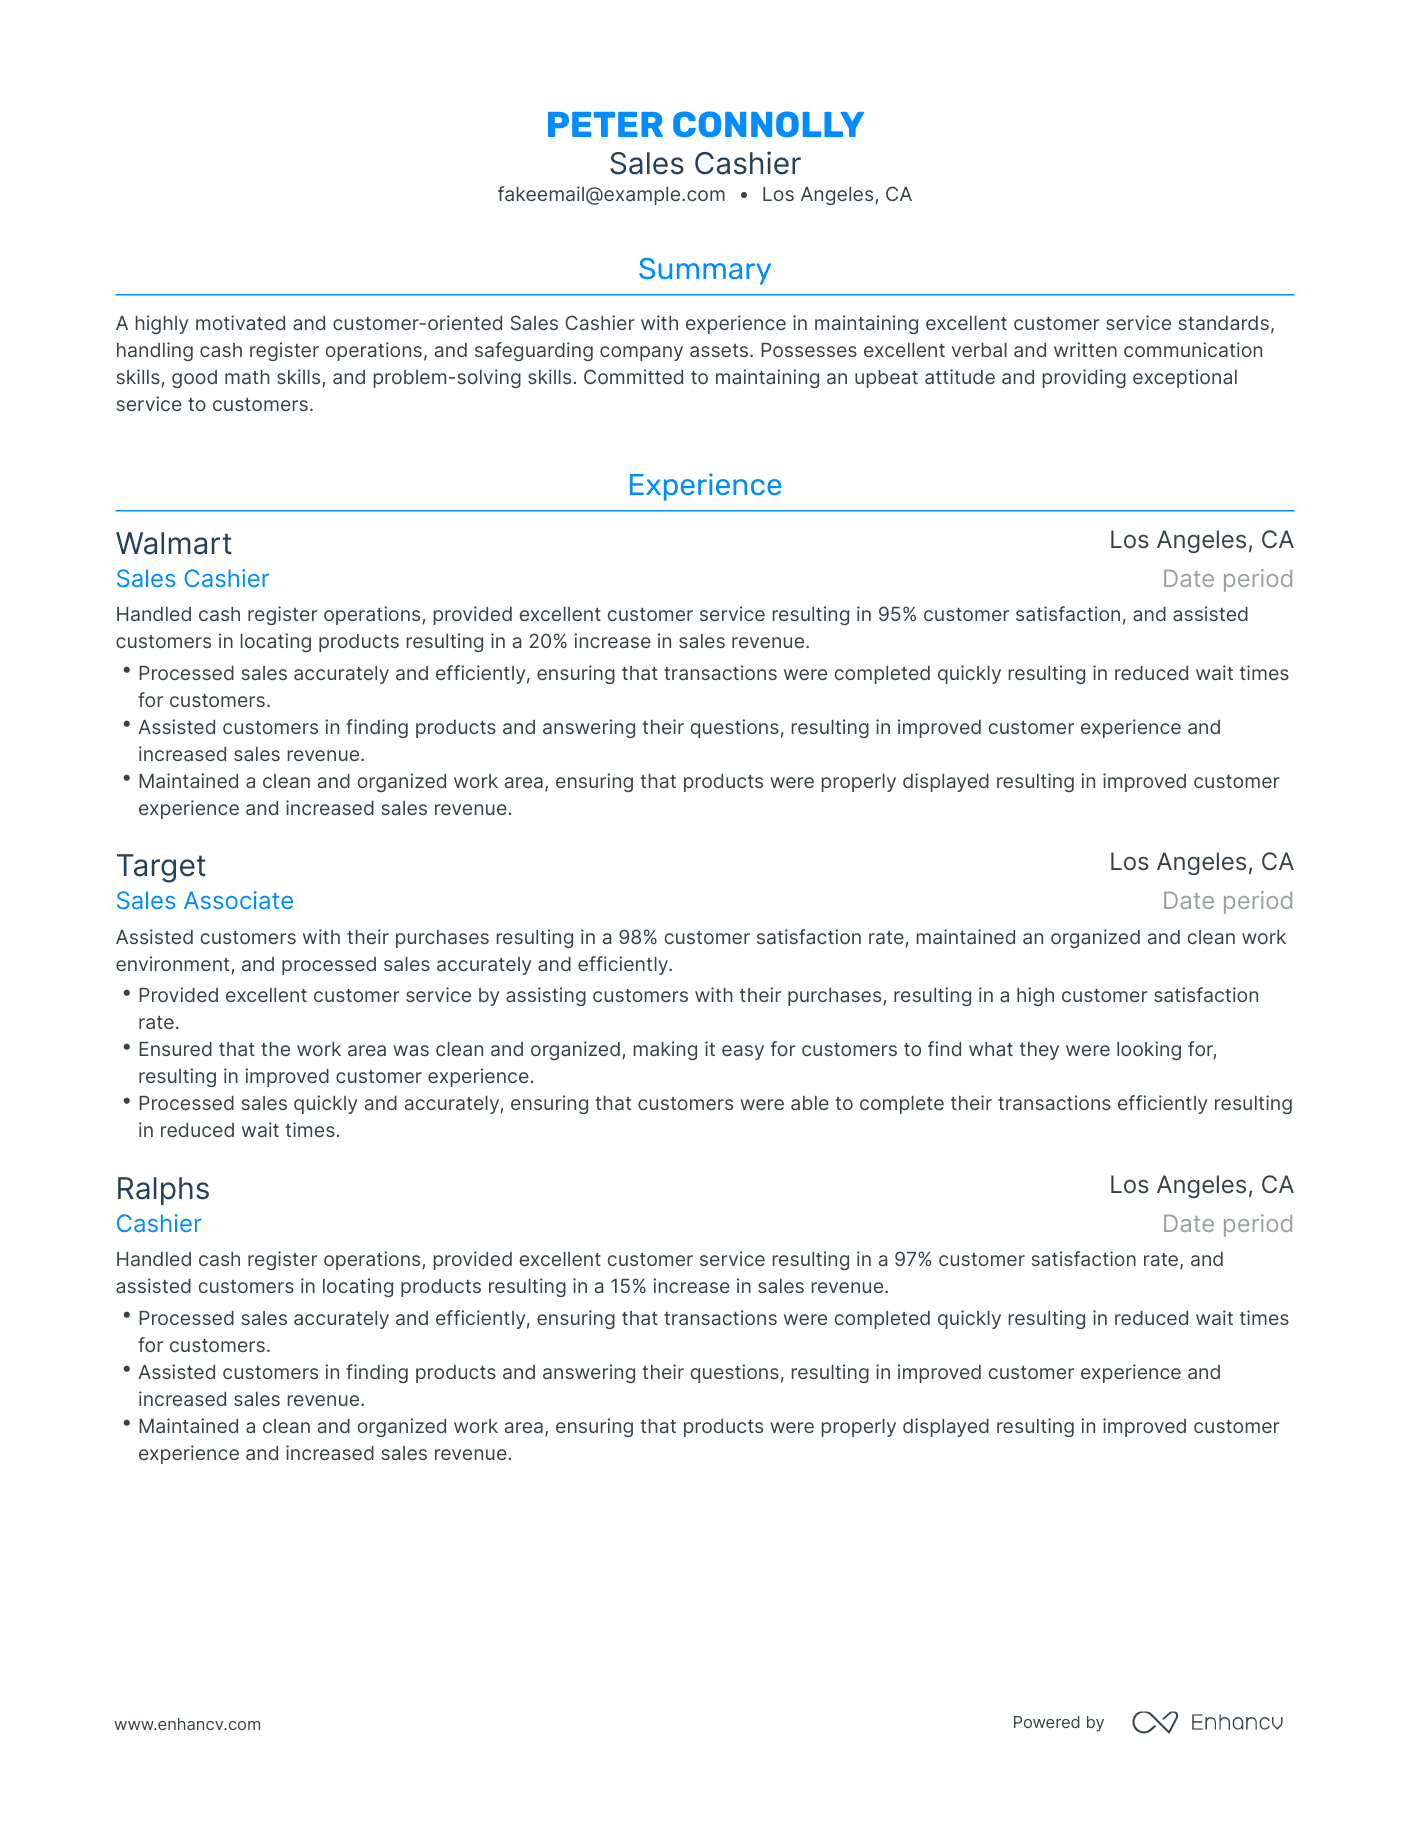 Traditional Sales Cashier Resume Template